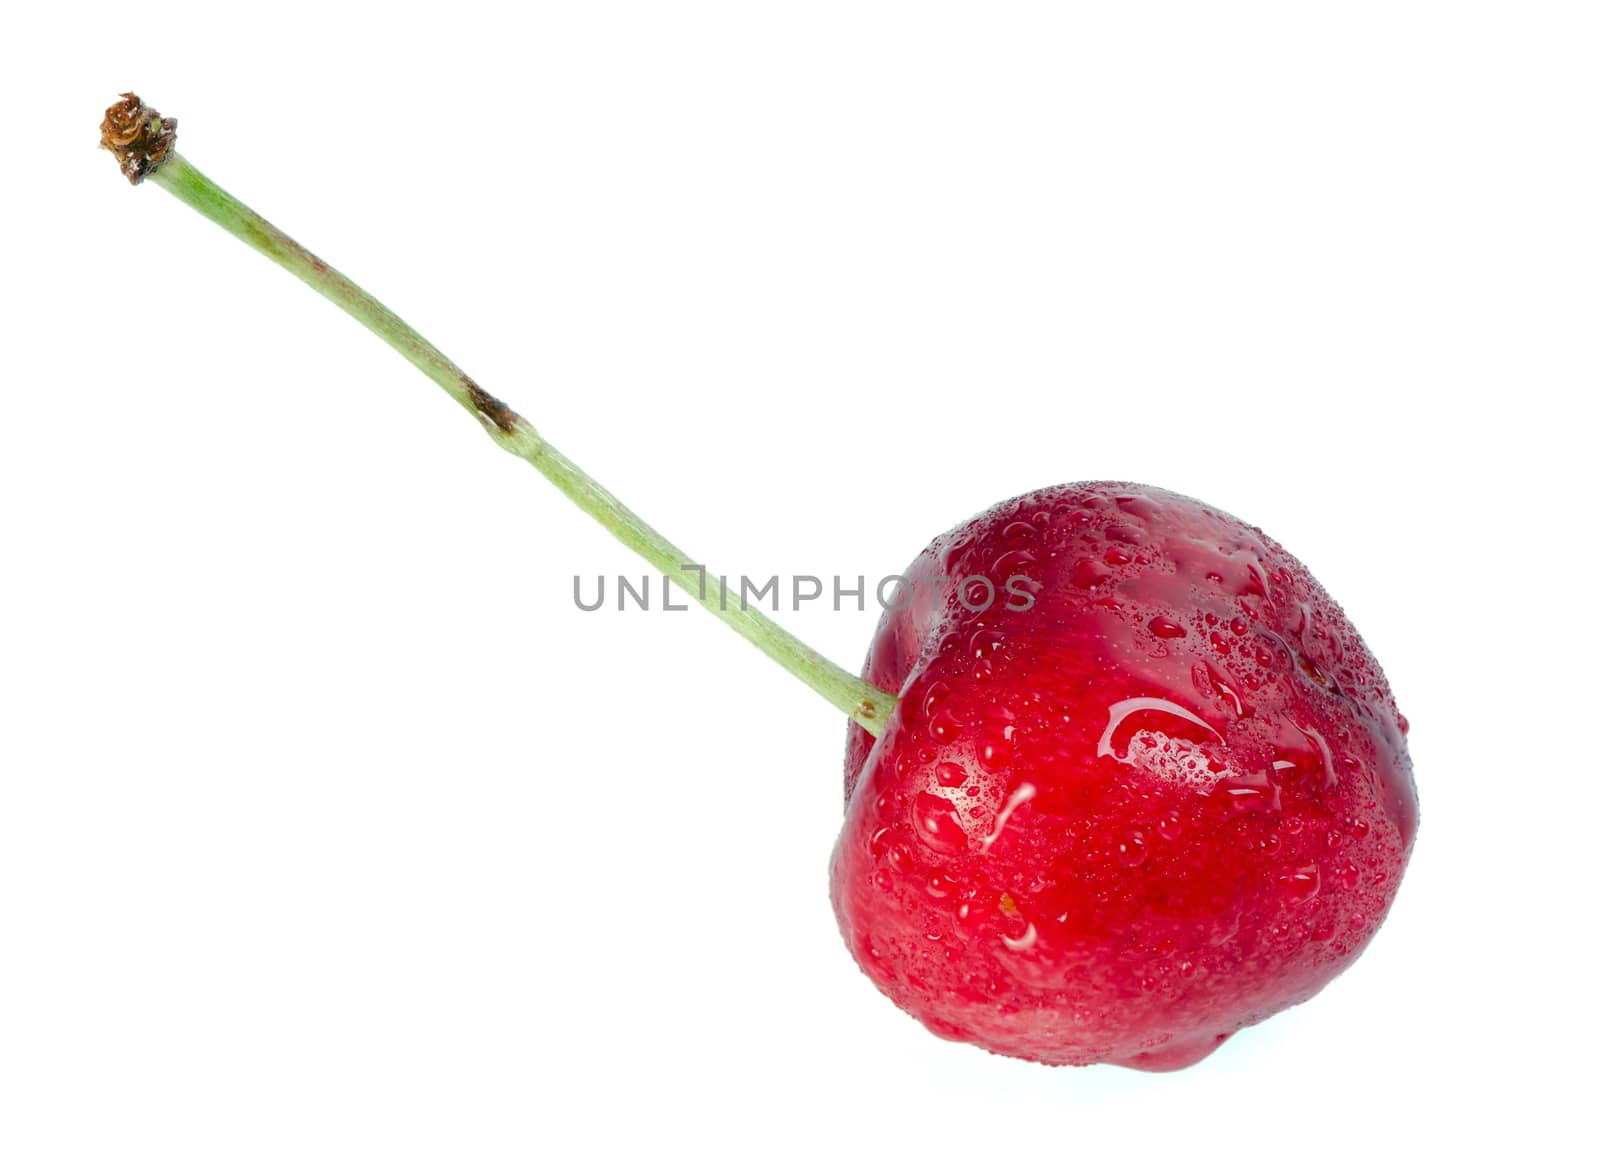 Fresh dewy cherry isolated on white background.